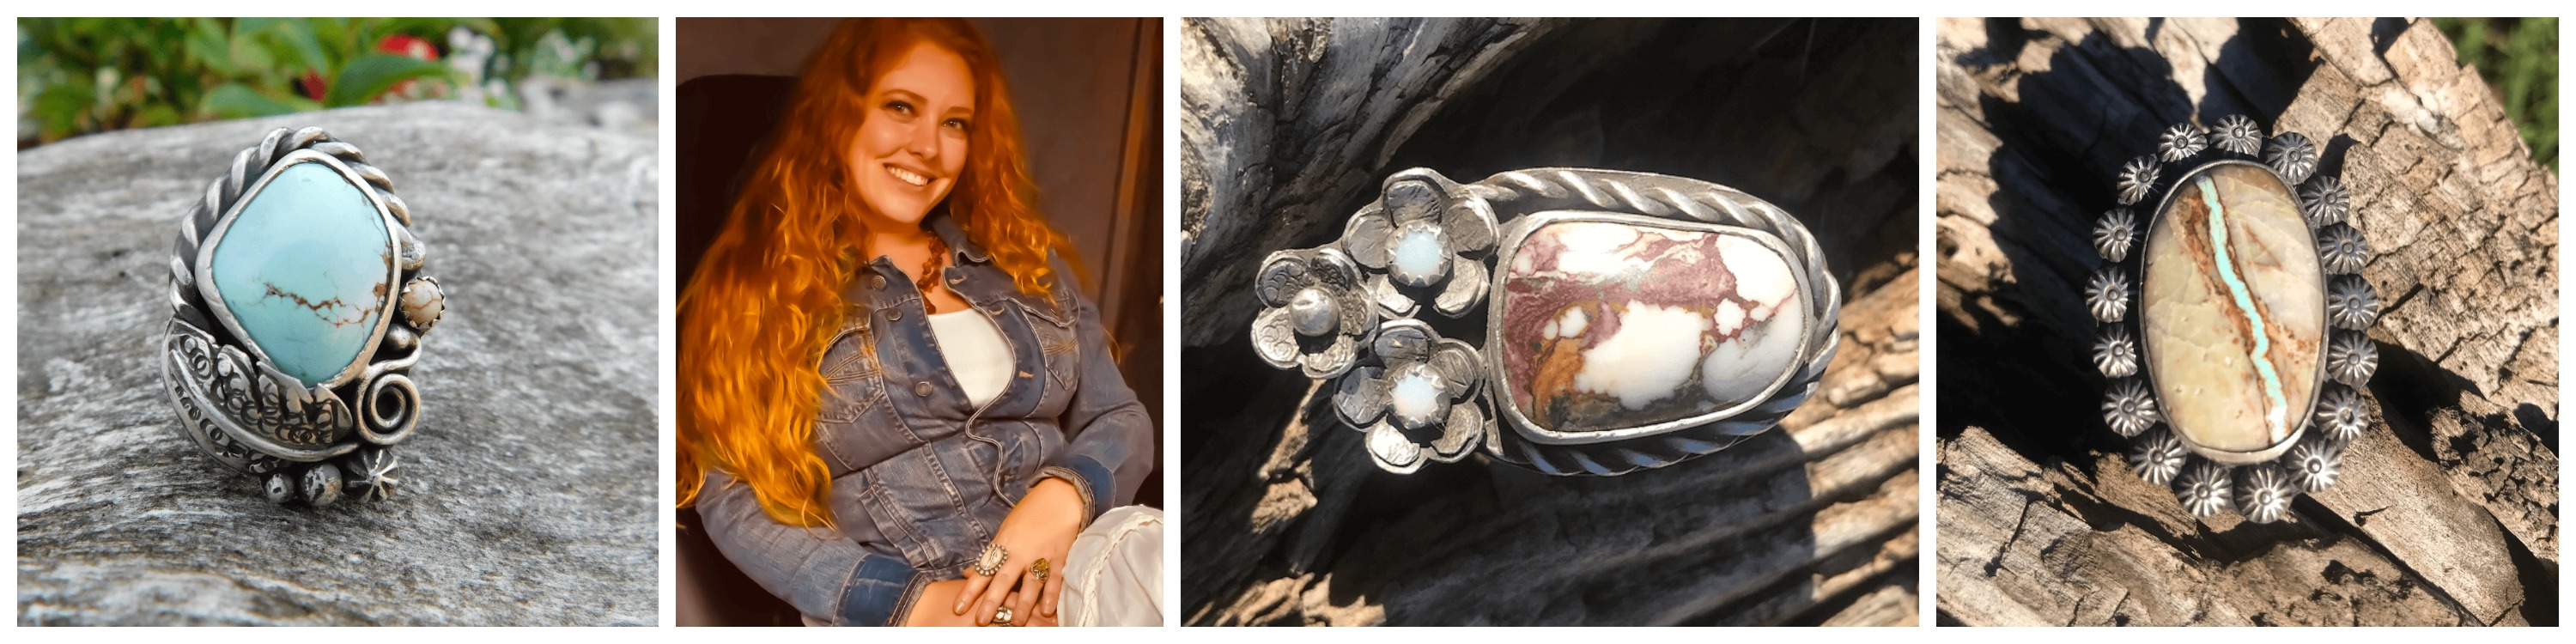 Images of Amy Leistiko and her jewelry.